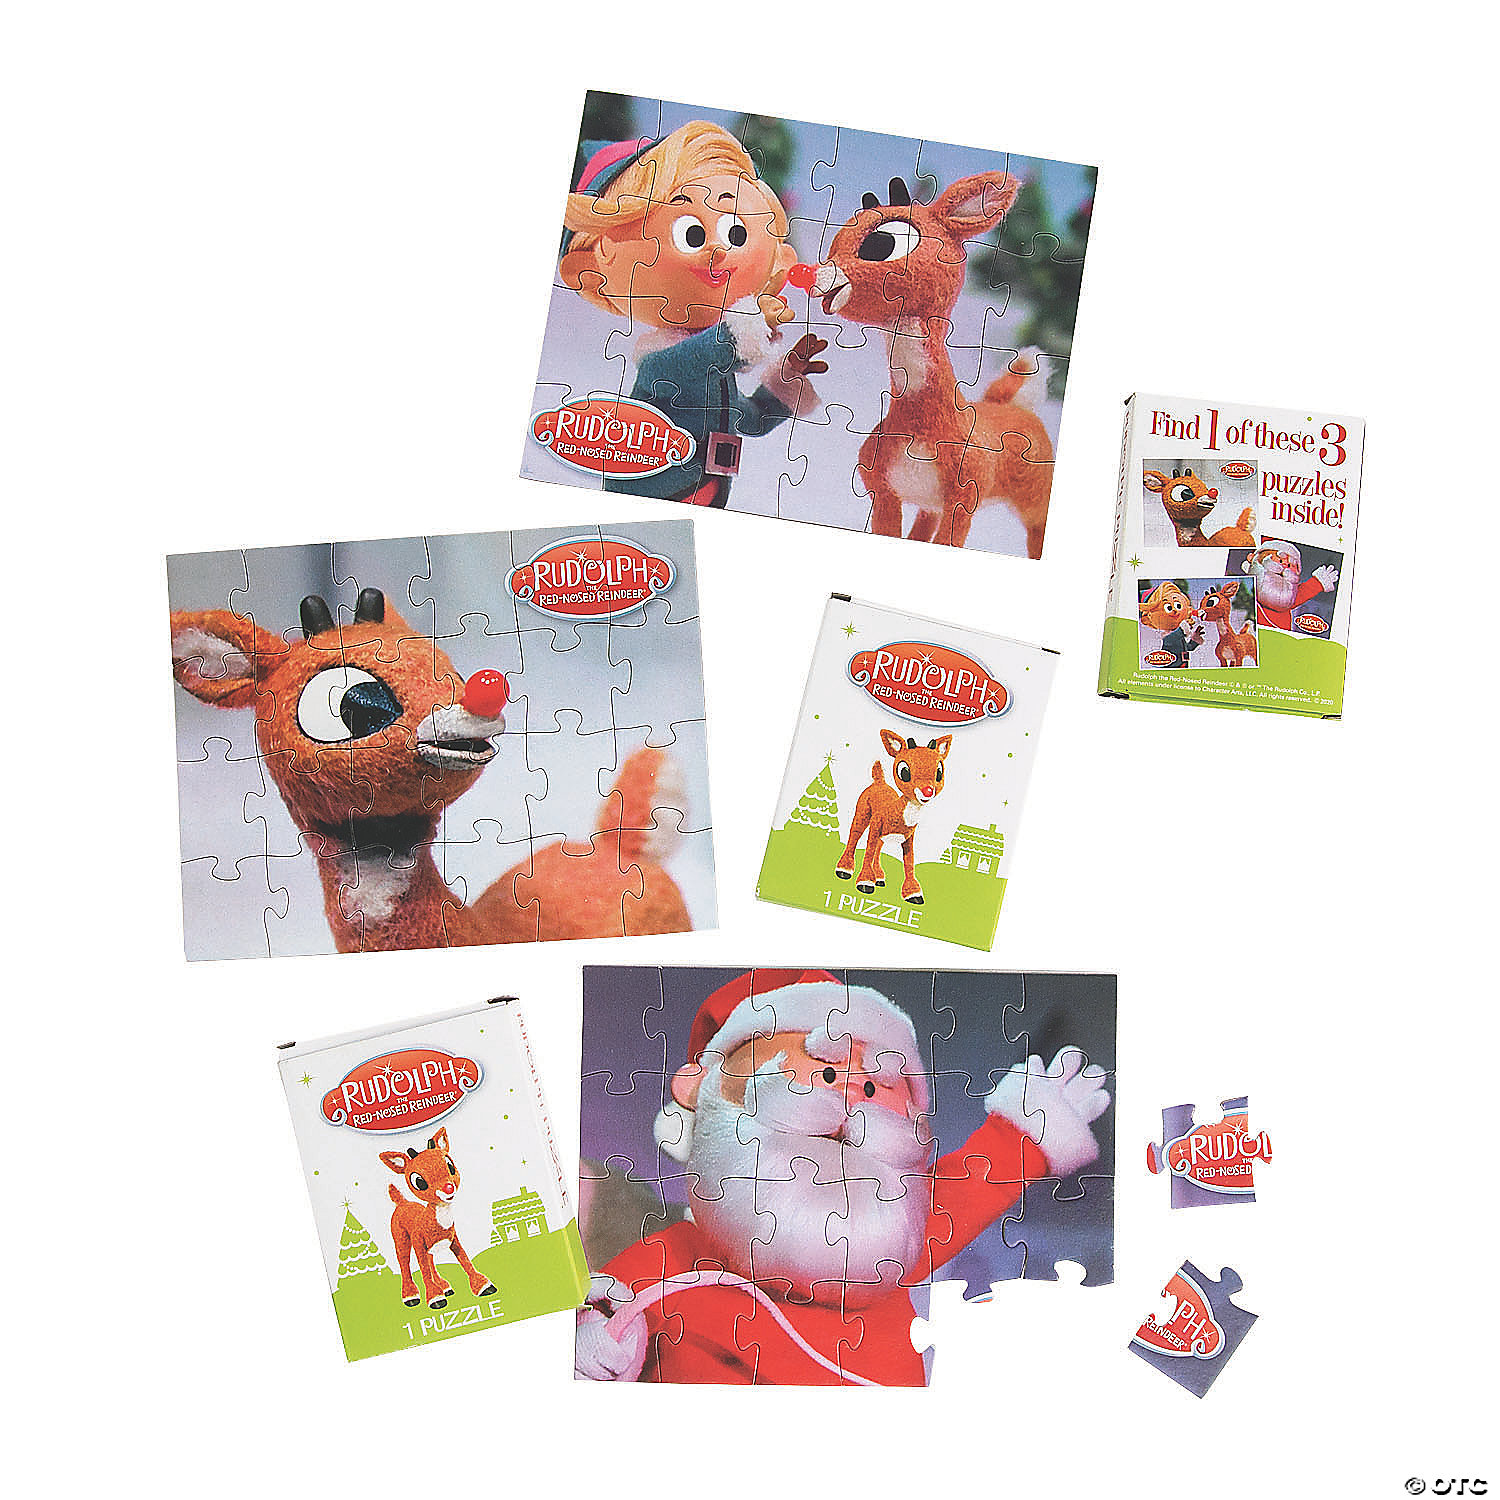 Puzzle Rudolph The Red-Nosed Reindeer Puzzle 100 Pc Finished Size 12"X9" 